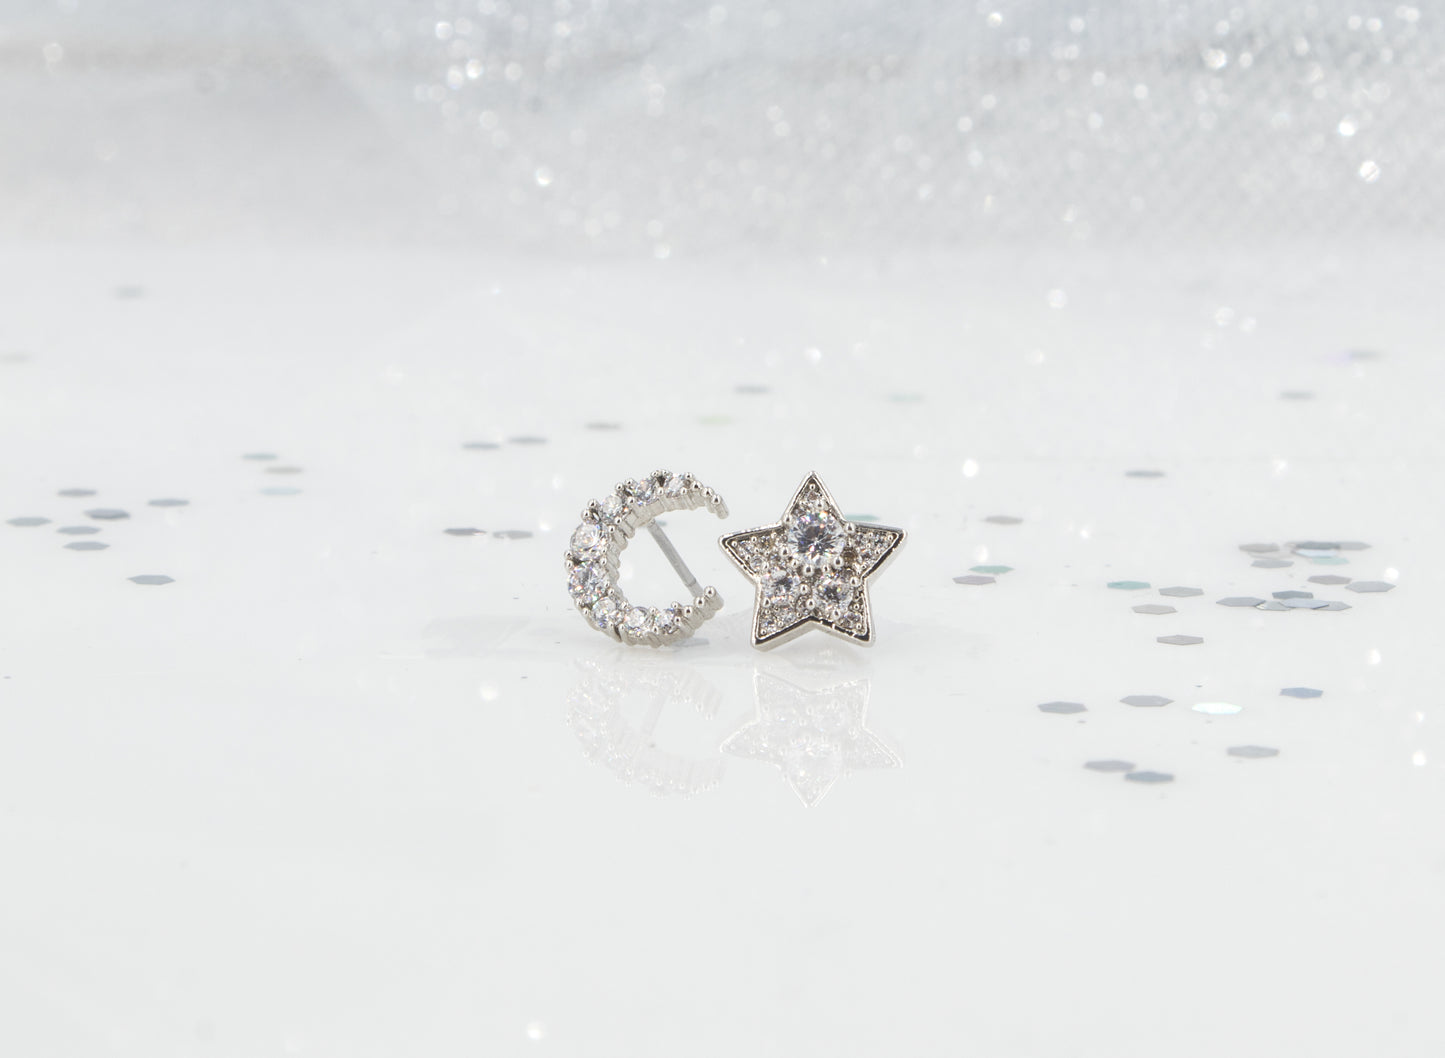 Crescent Moon and Star Earrings